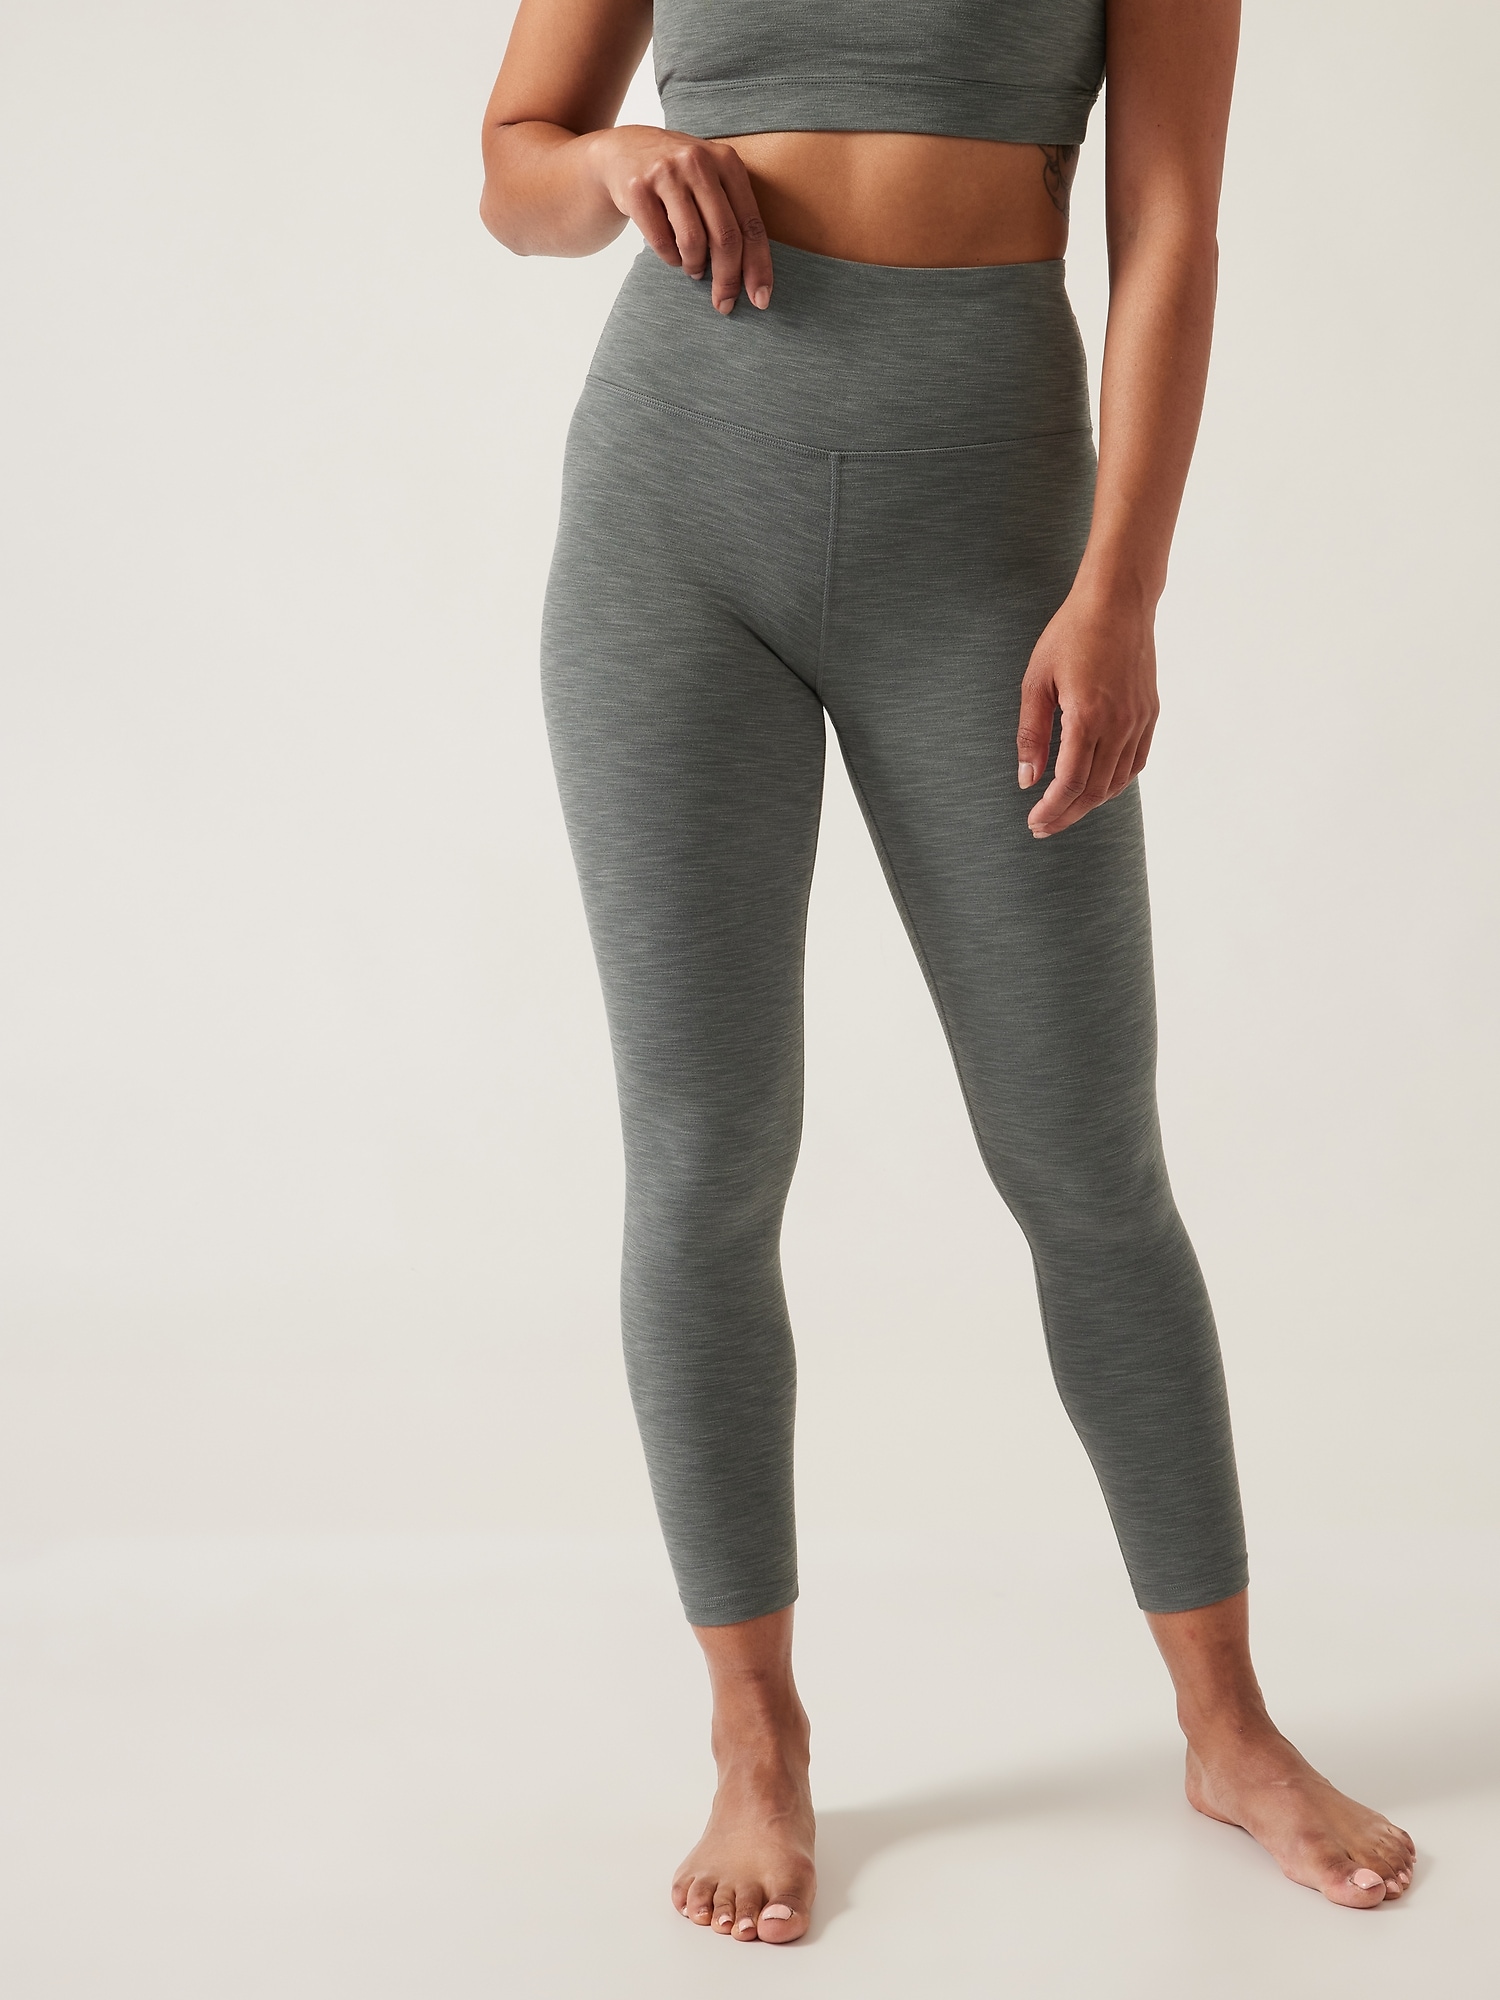 BT Heathered High-Rise 7/8 Tights